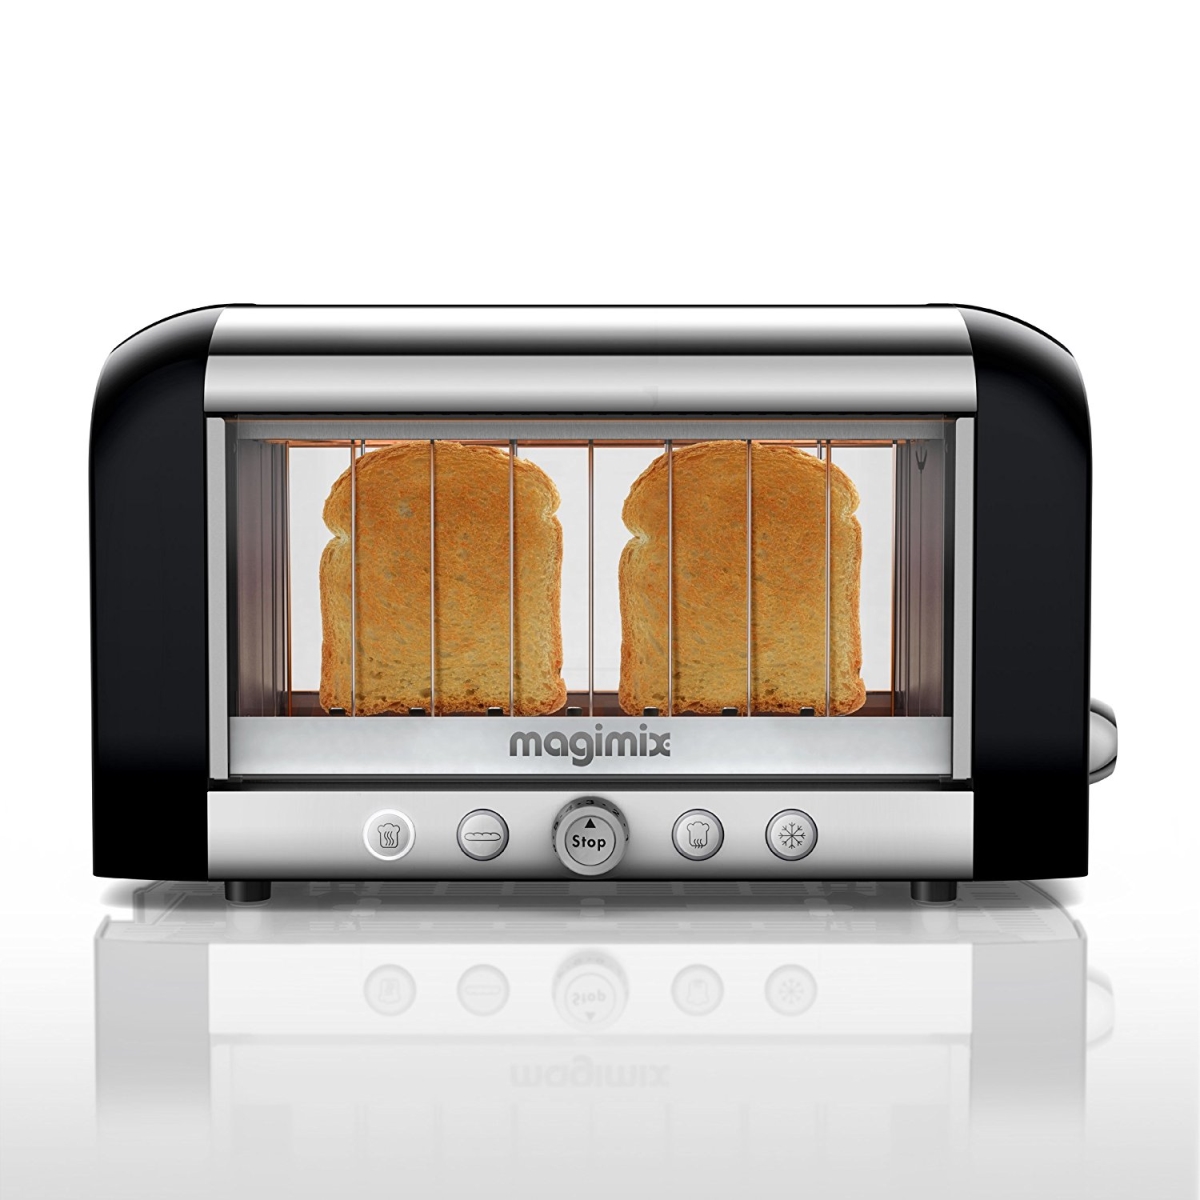 Picture of Magimix 11 529 LC 2-Slot Vision Toaster - Black